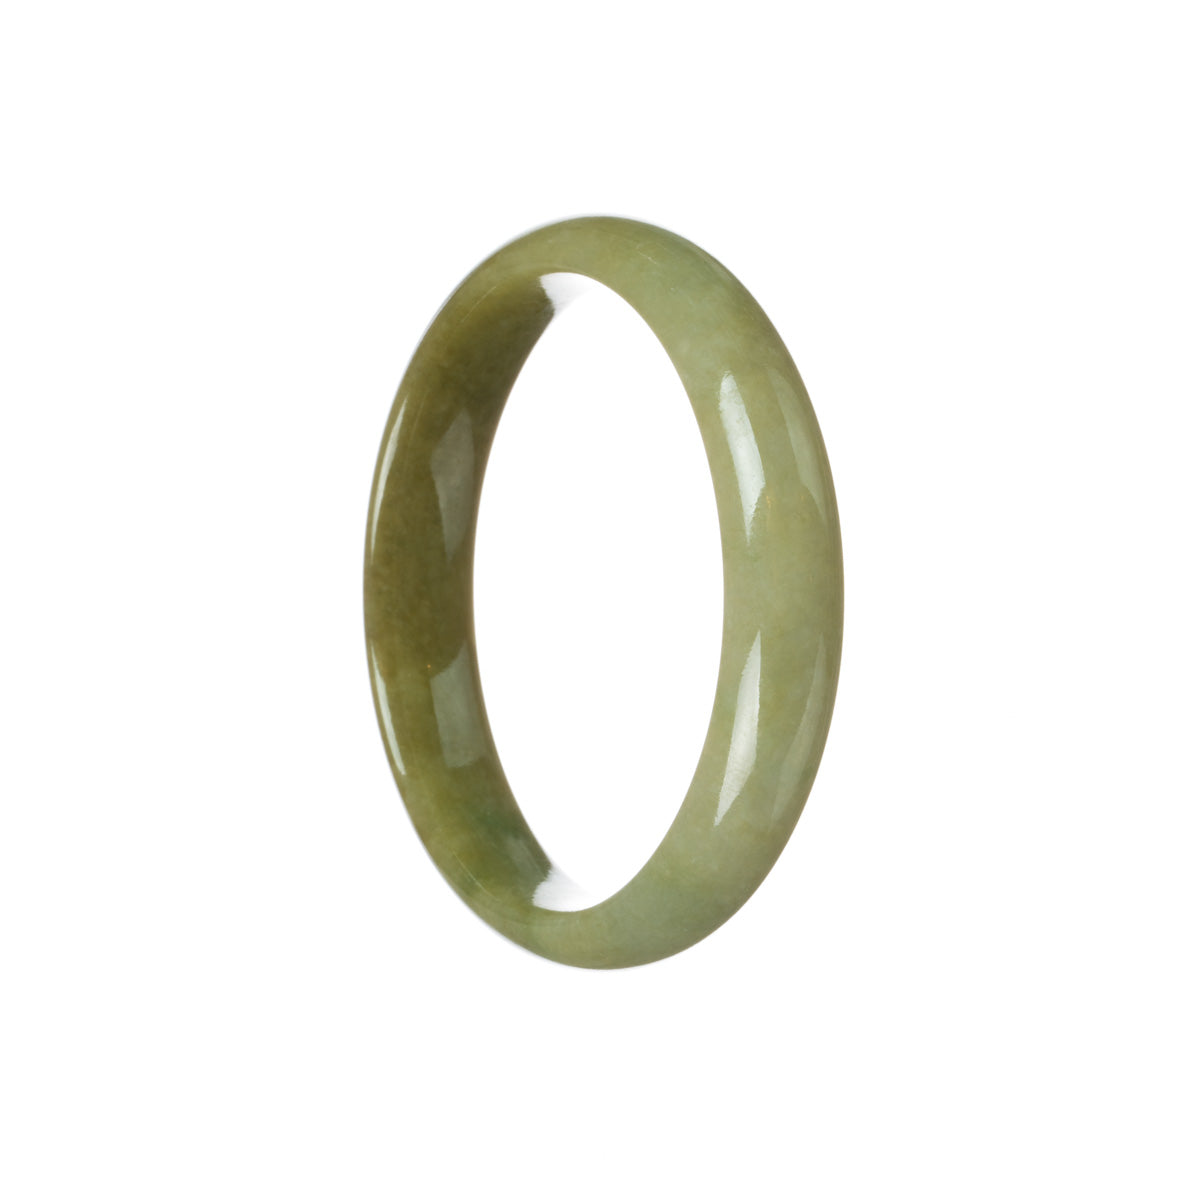 Real Grade A Brownish olive green with brown patch Jadeite Bangle Bracelet - 59mm Half Moon